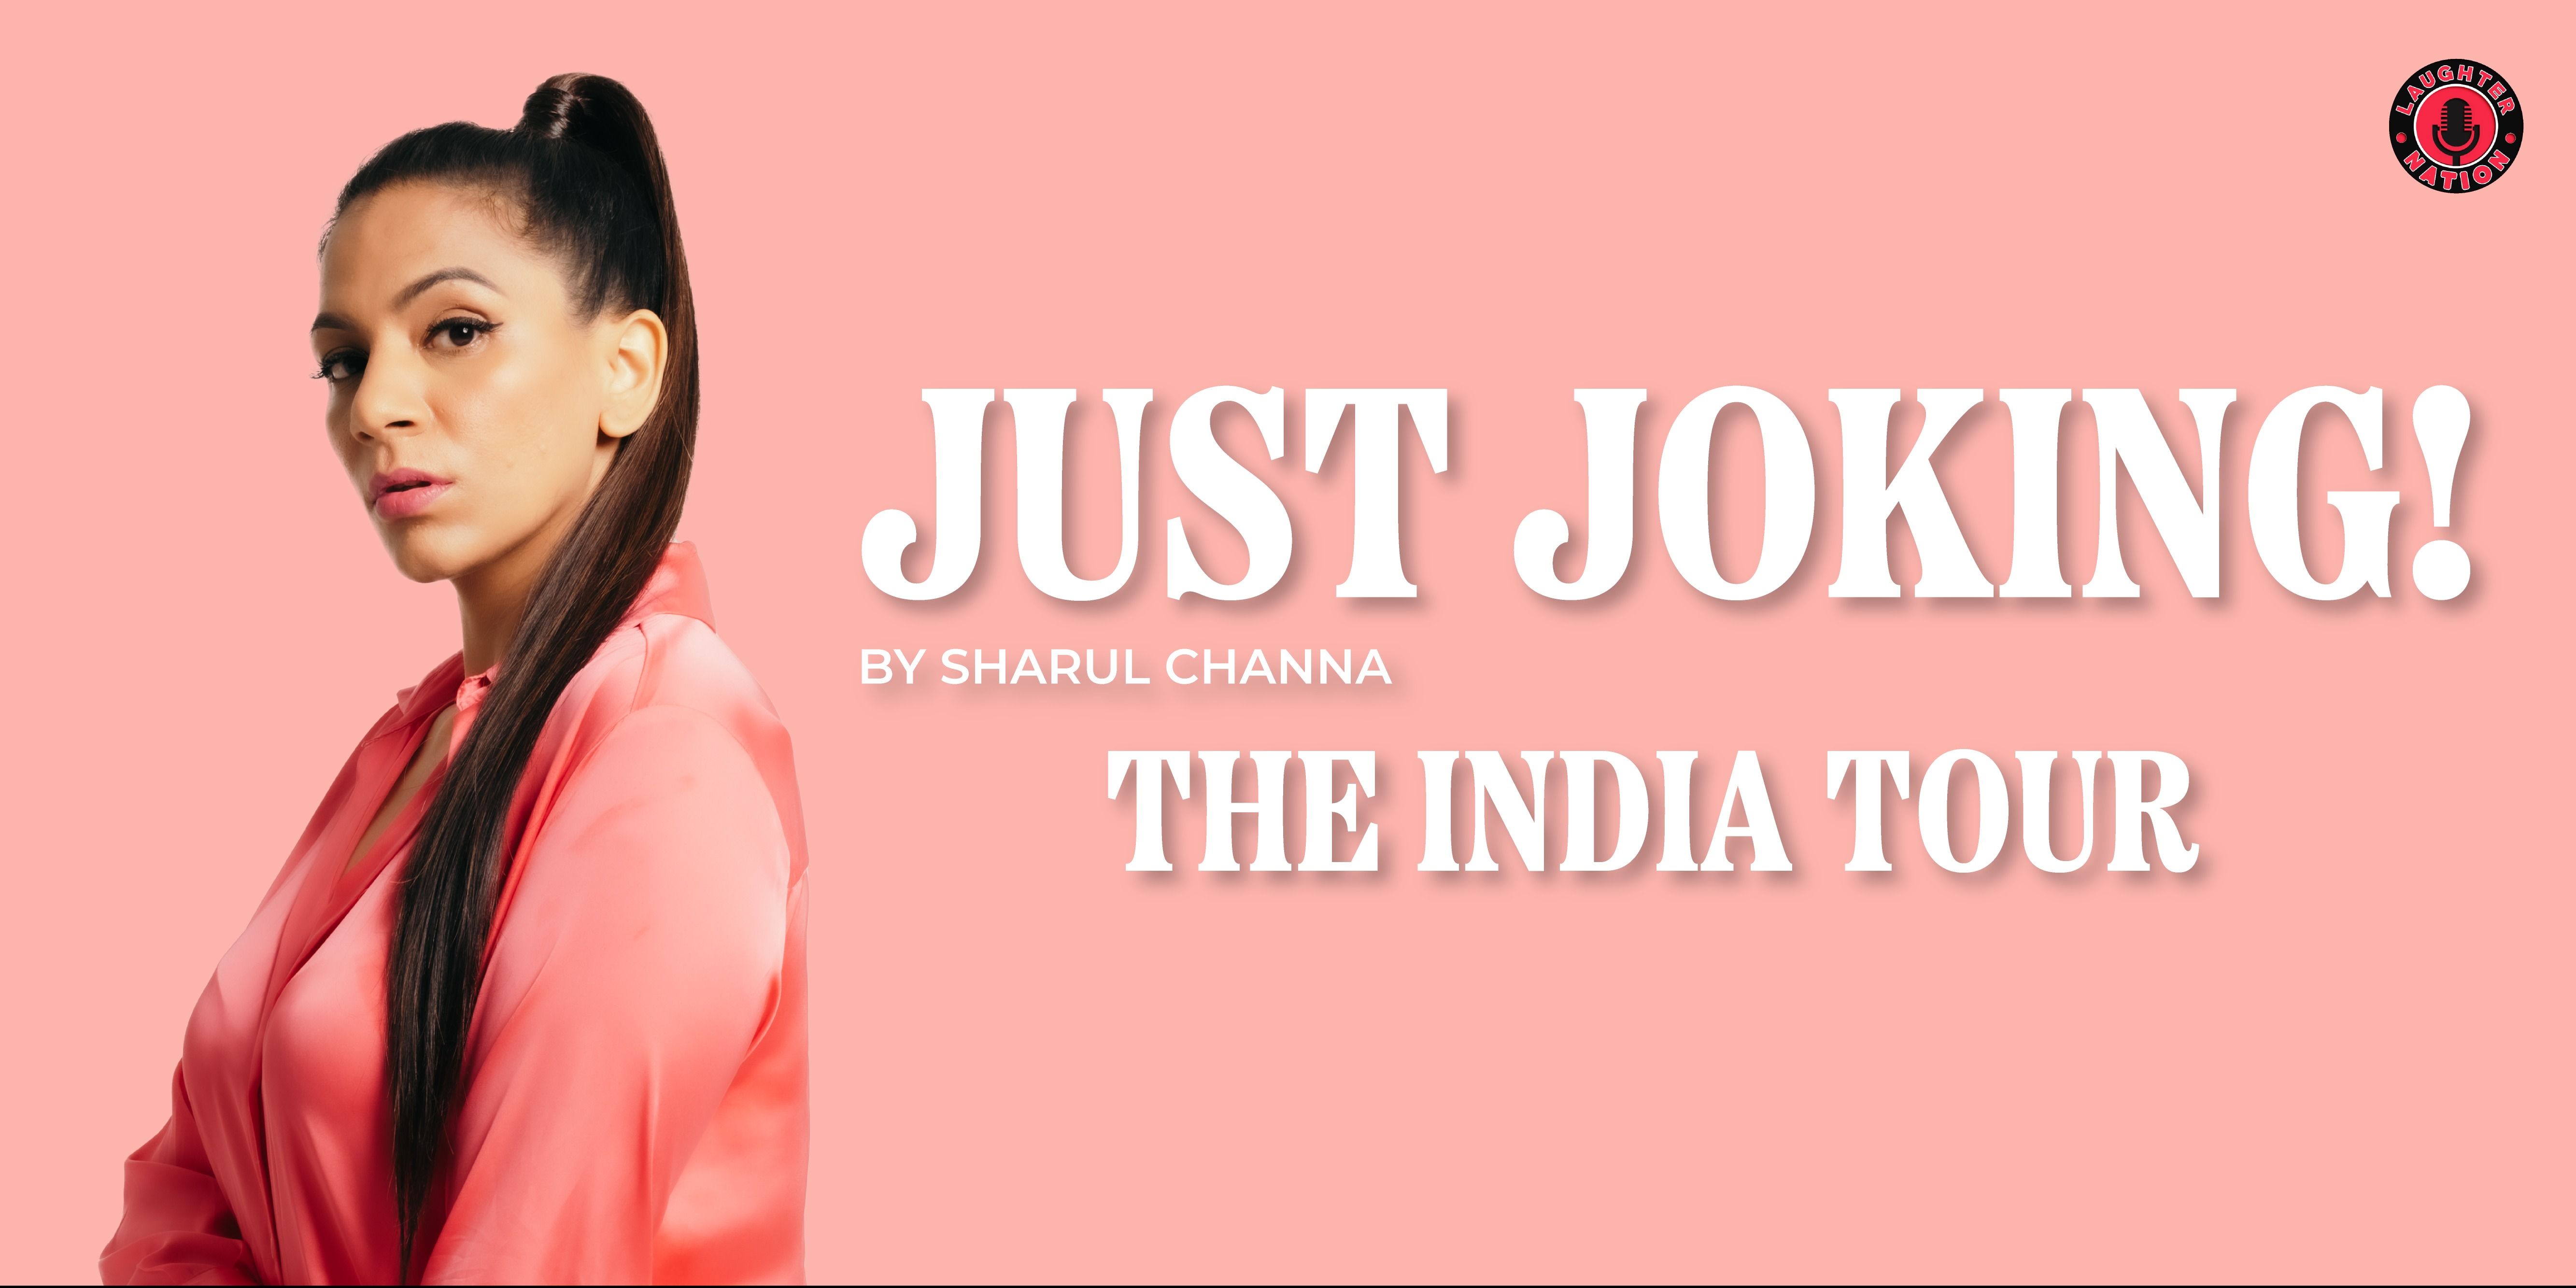 Just Joking ! by Sharul Channa, The India Tour in Delhi